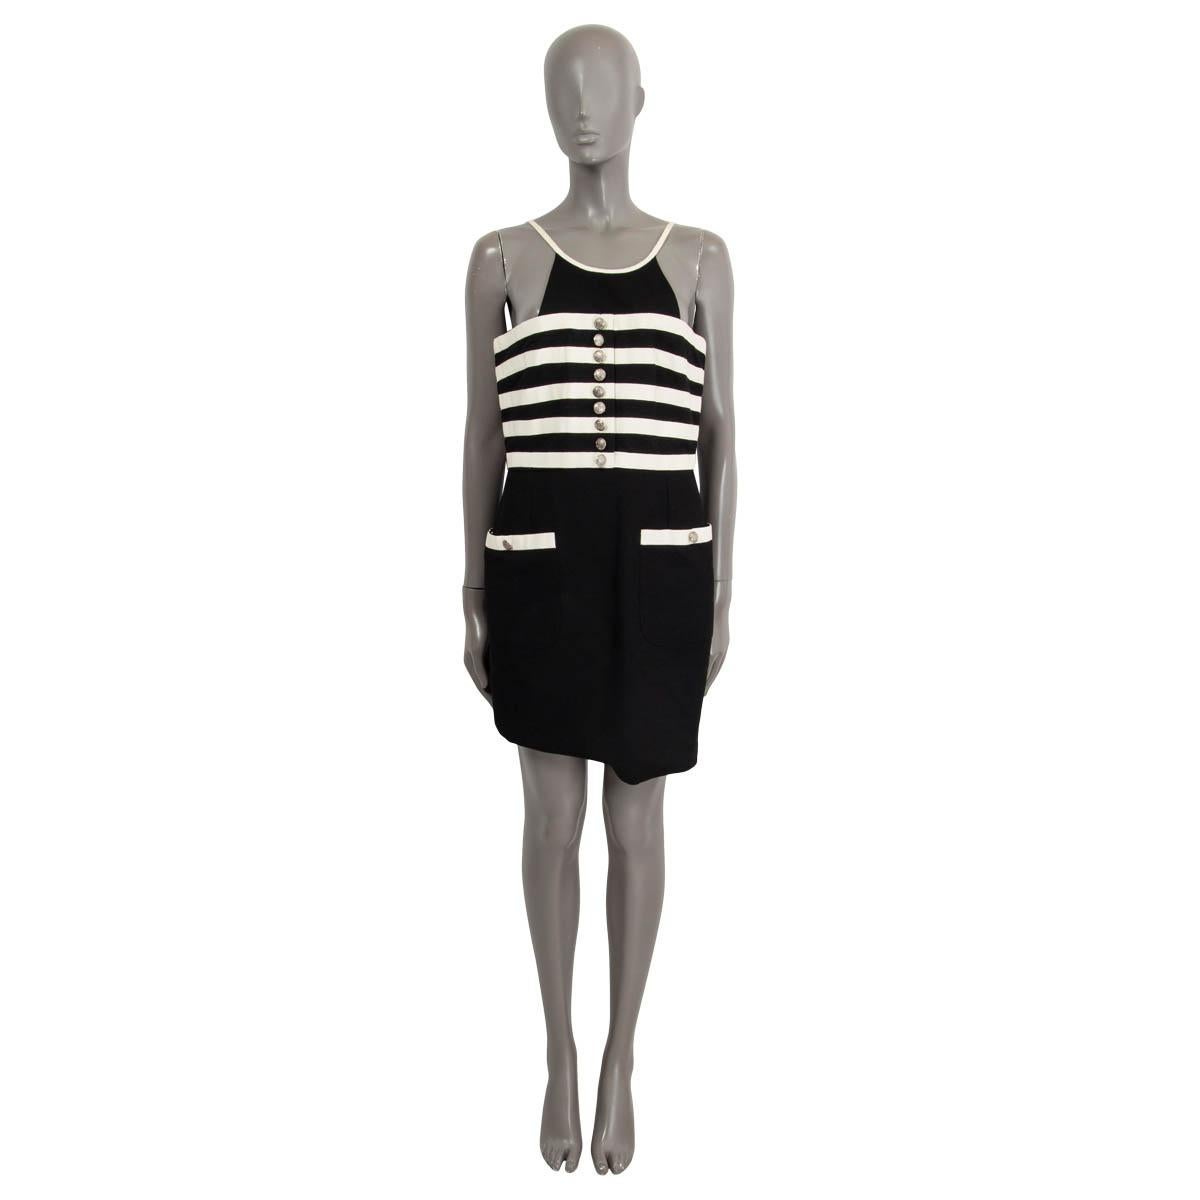 100% authentic Chanel striped halter neck mini dress in black and white cotton (assumed cause tag is missing). Features two buttoned patch pockets on the front and faux buttons on the bust. Opens with a zipper and a hook on the back. Lined in black